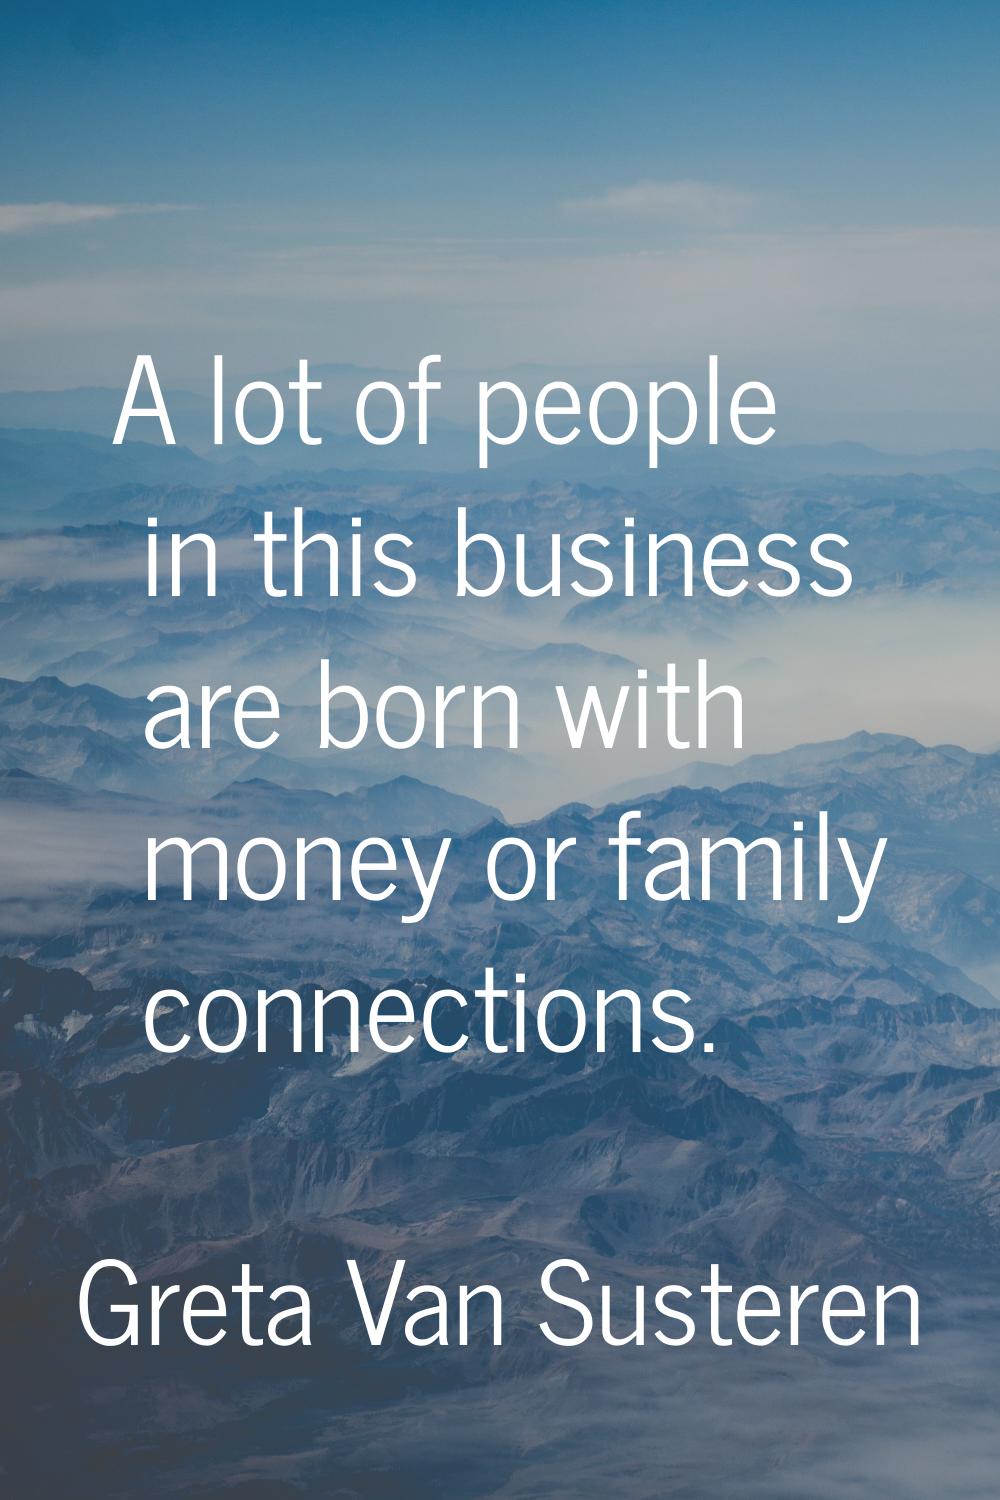 A lot of people in this business are born with money or family connections.